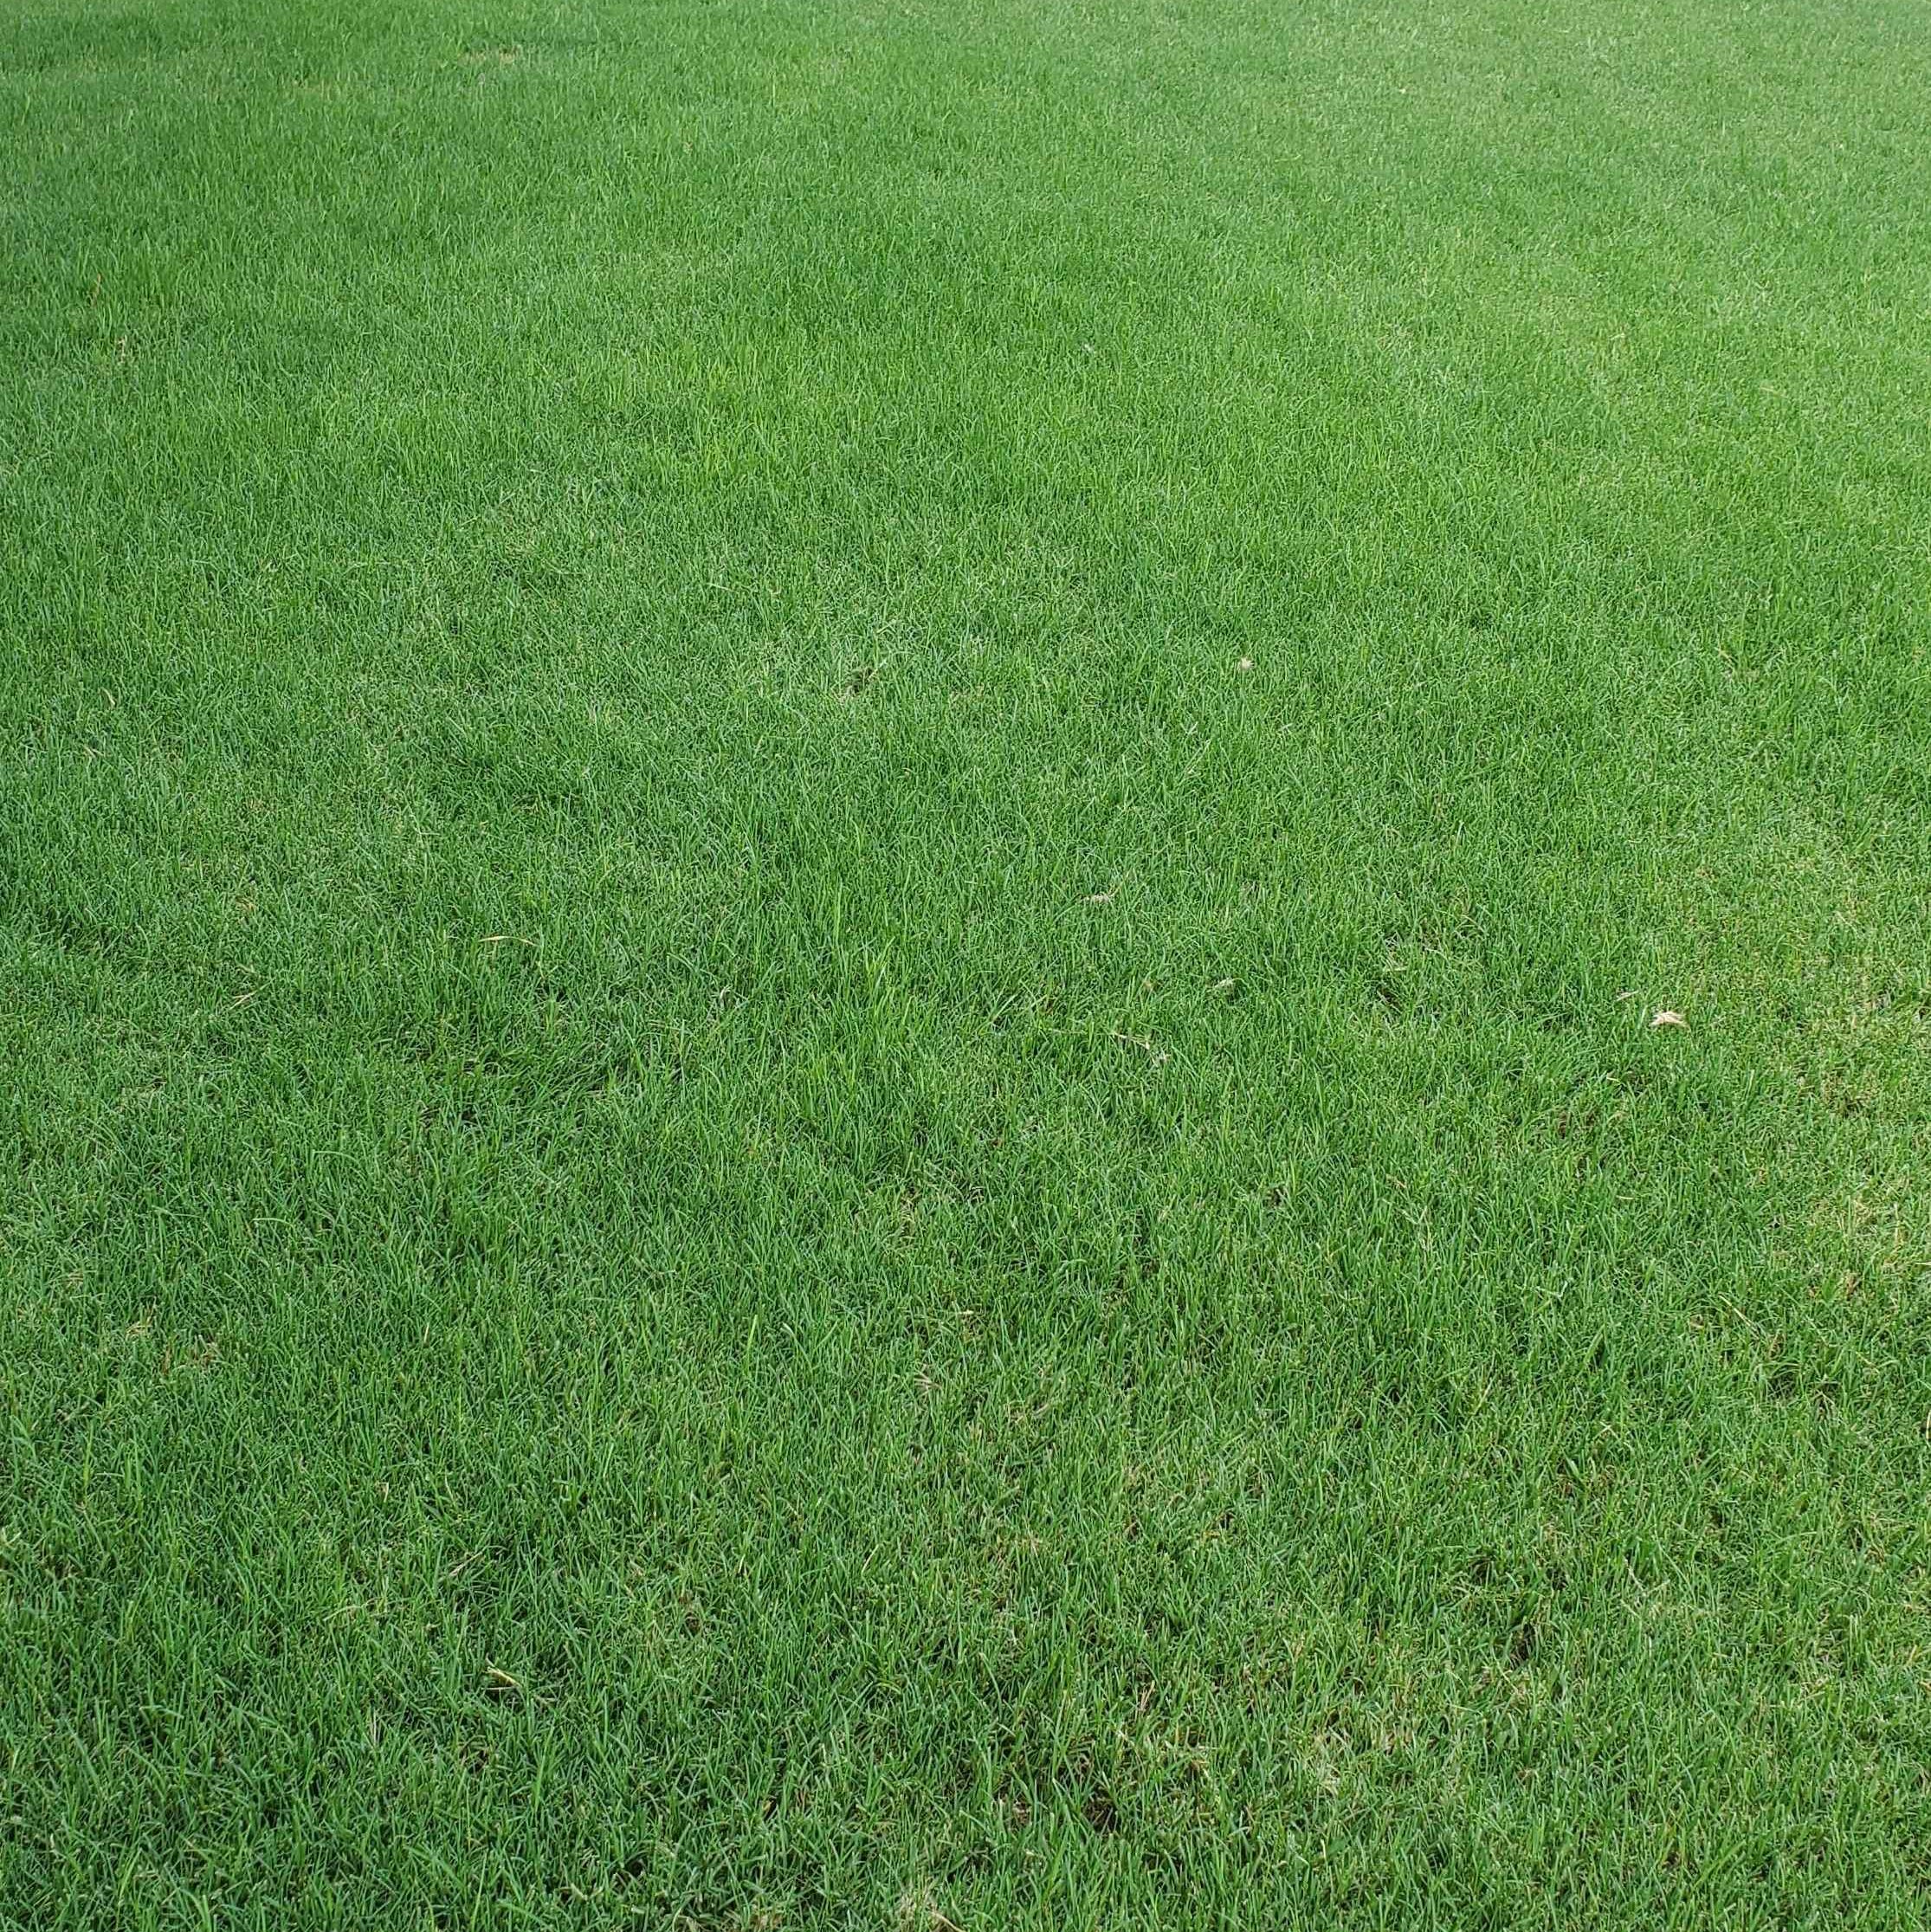 Do I really need to aerate my lawn?